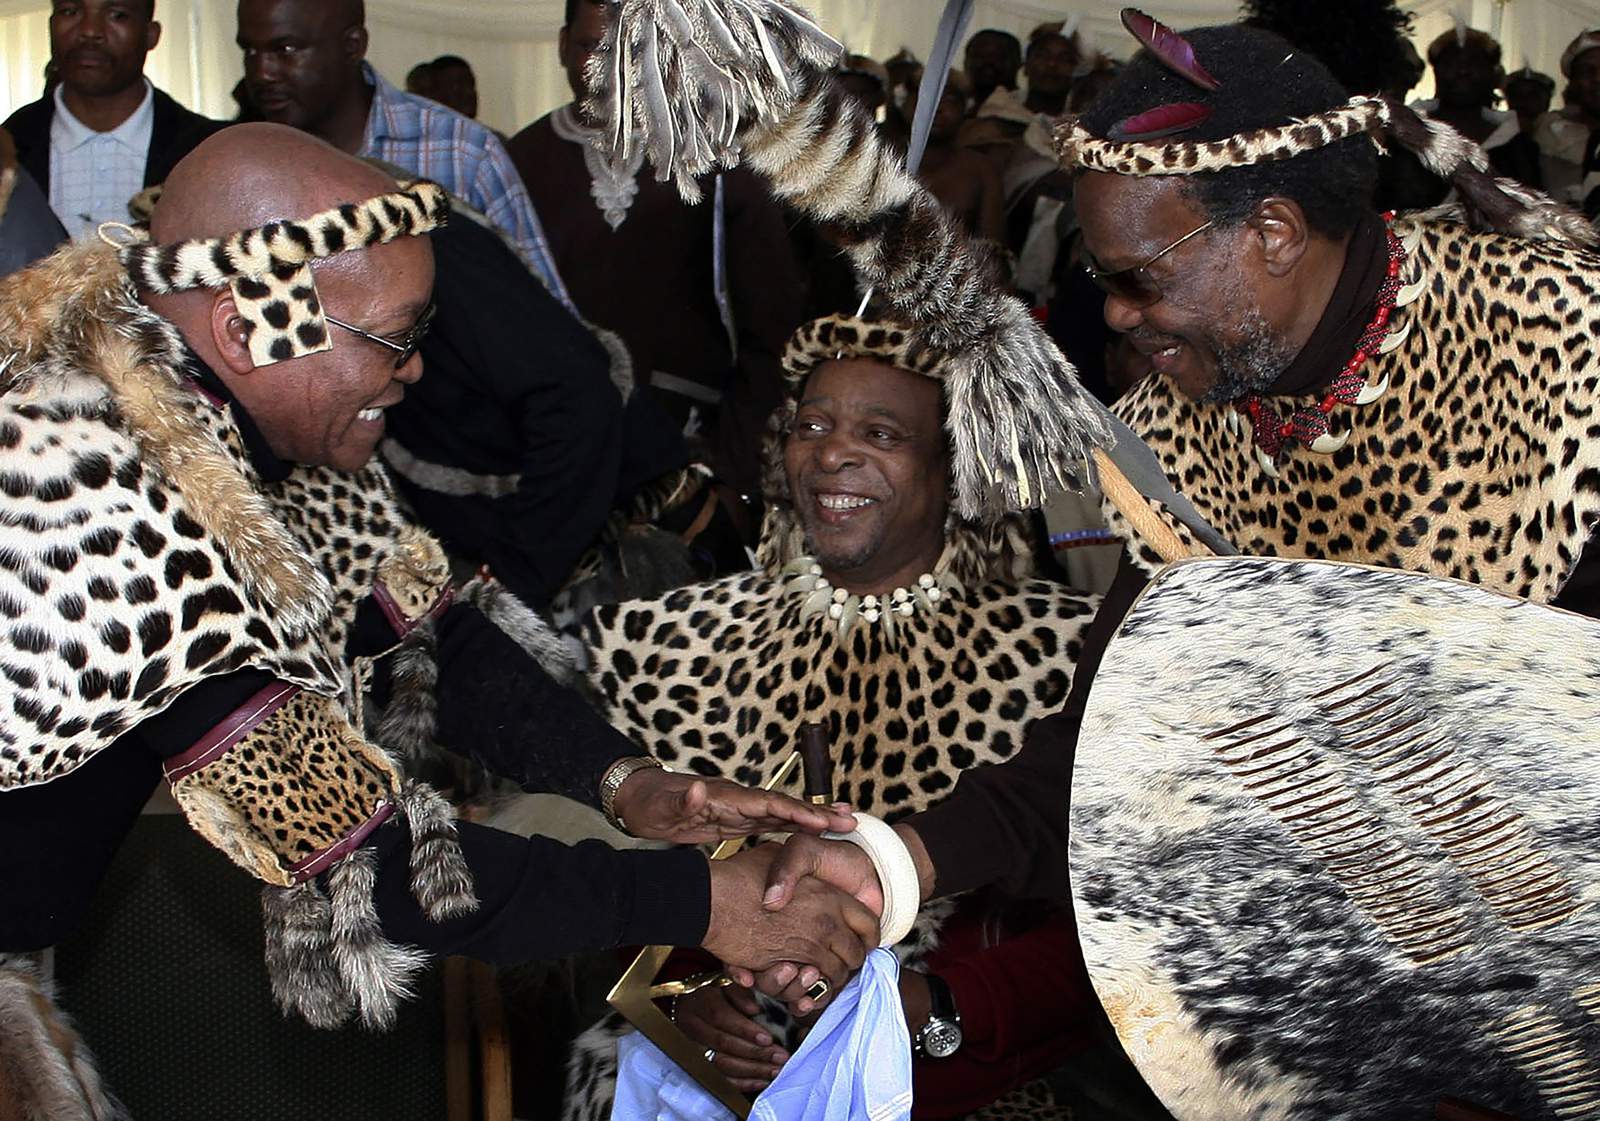 South Africa's Zulu King Goodwill Zwelithini dies, aged 72